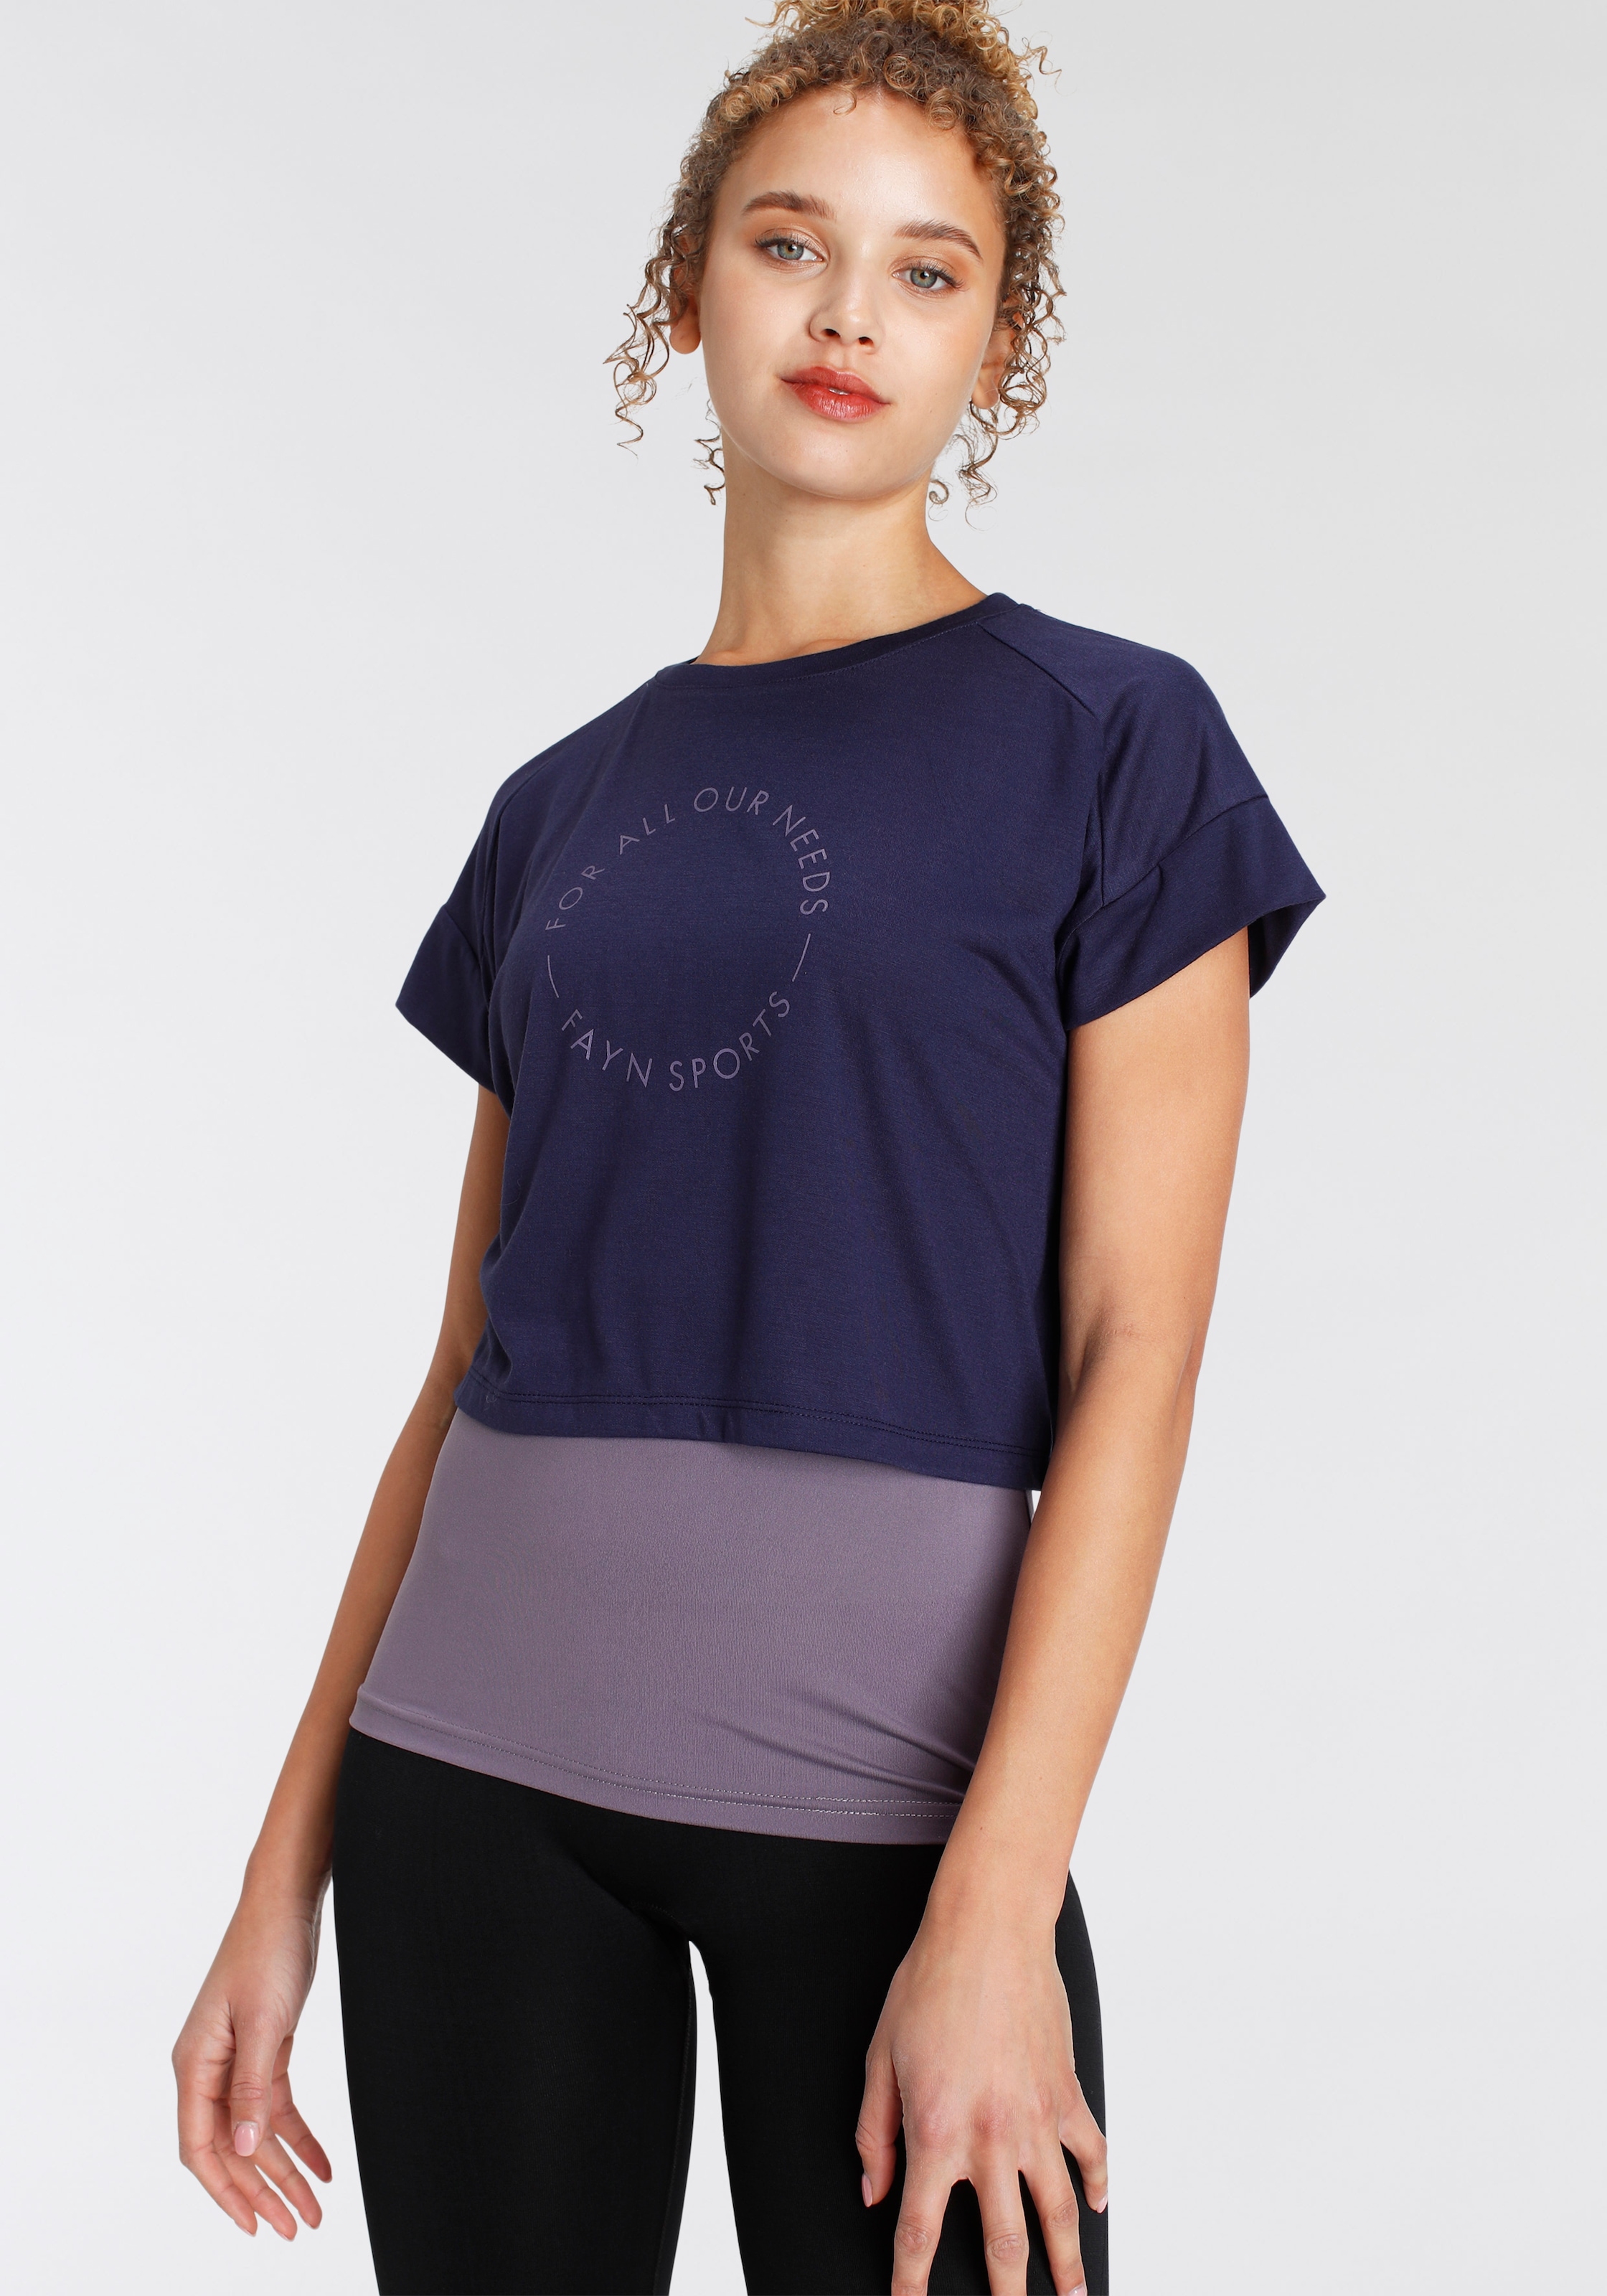 FAYN SPORTS T-Shirt »Cropped Top«, 2 tlg.) (Set, ♕ bei